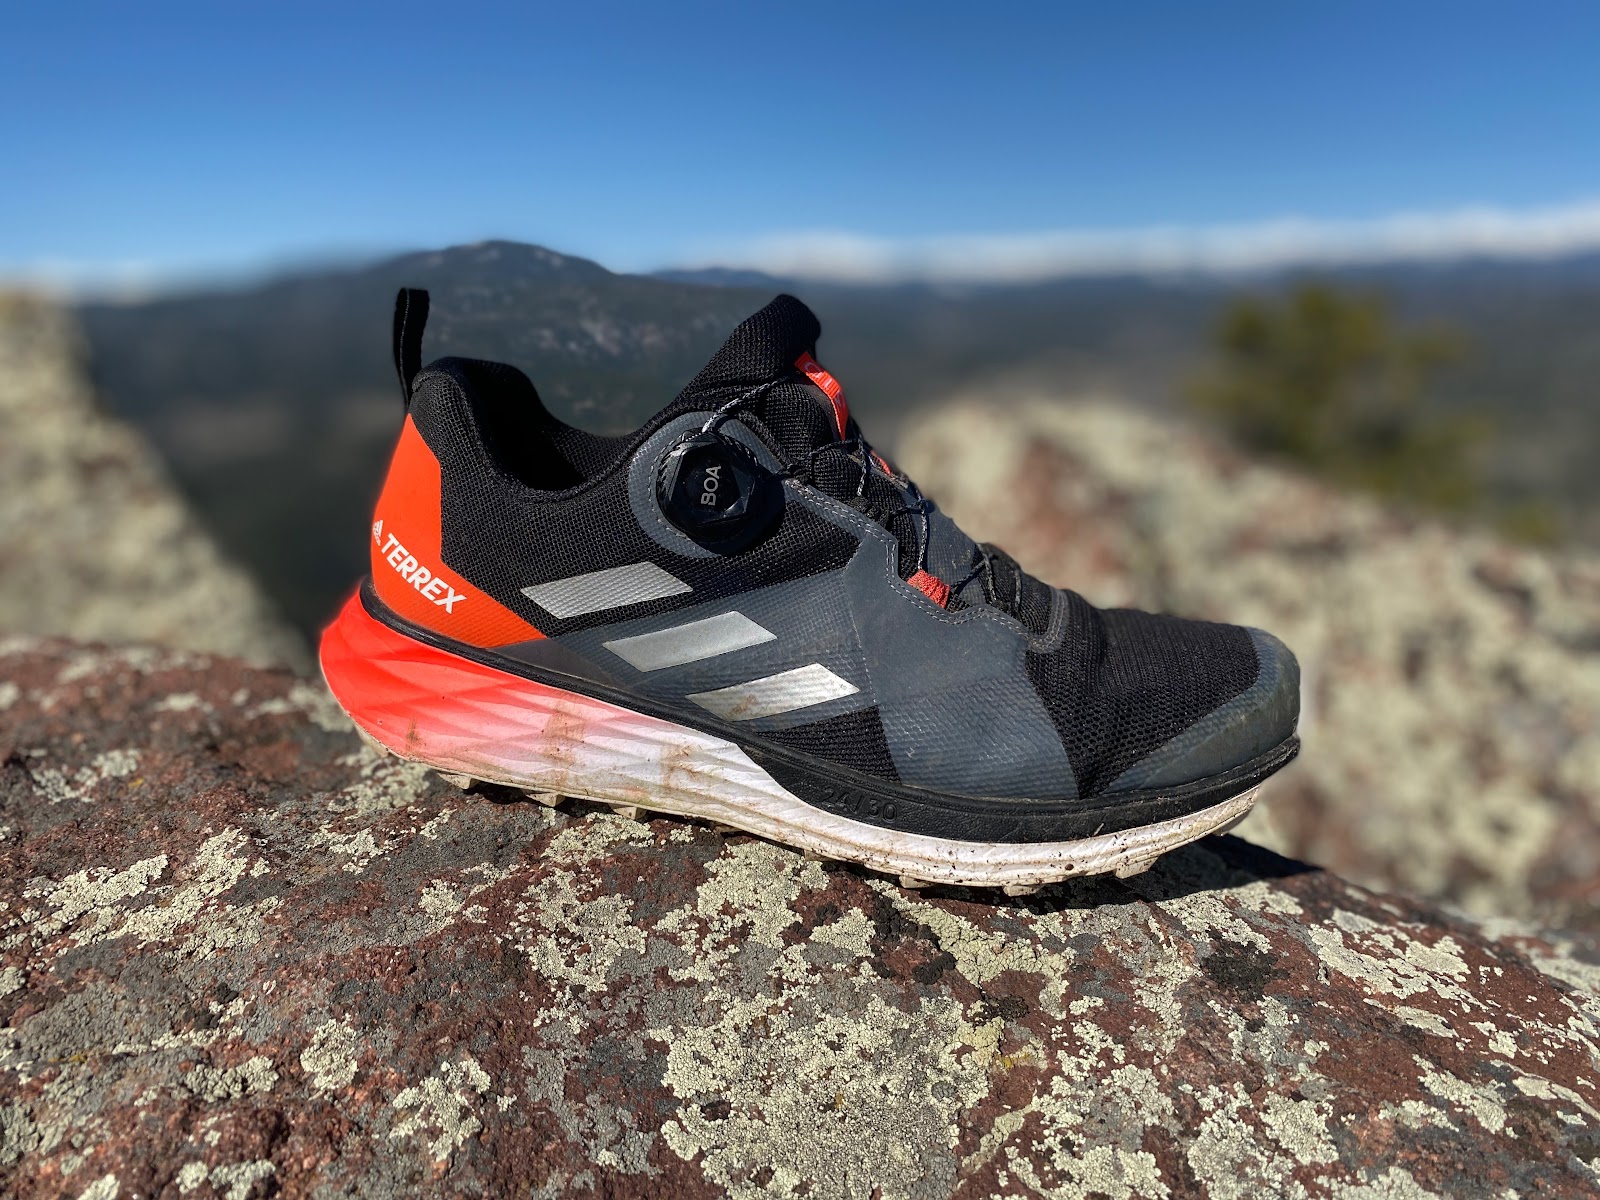 Fabricante Animado mosquito Road Trail Run: adidas Terrex Two BOA Review: Dialed In, Comfortable, and  Versatile